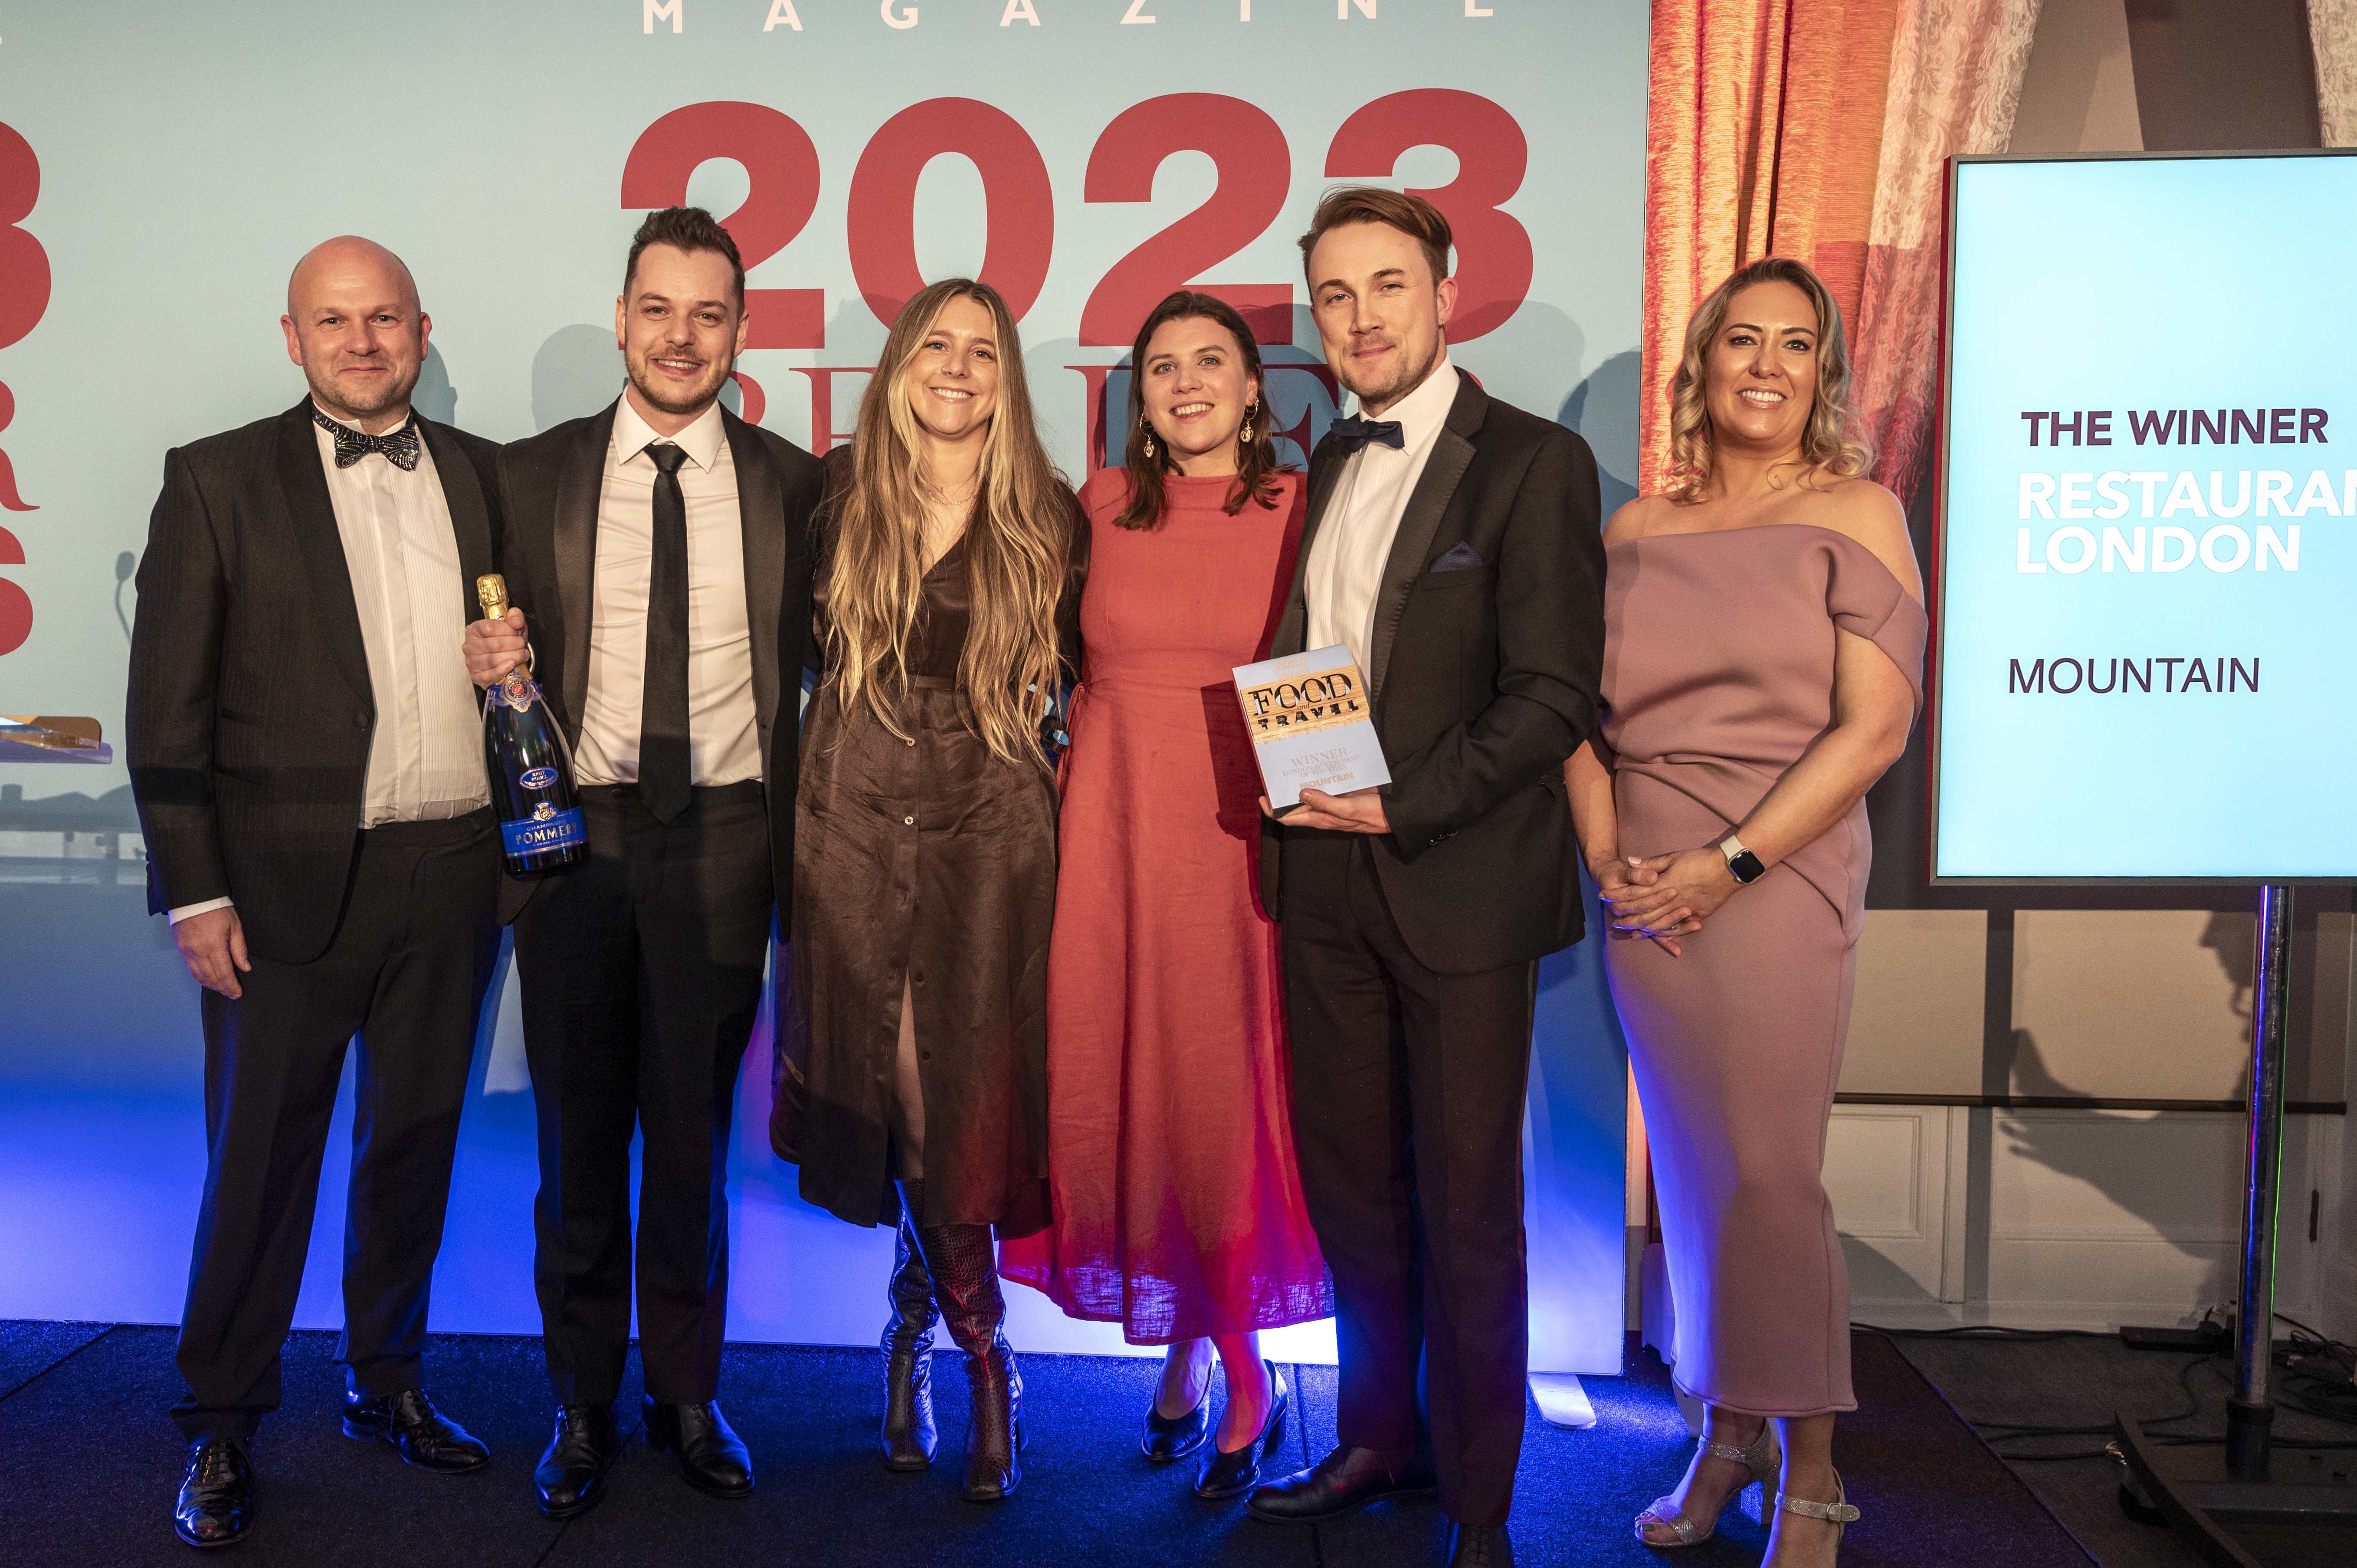 Mountain wins London Restaurant of the Year at the 2023 Food and Travel Reader Awards